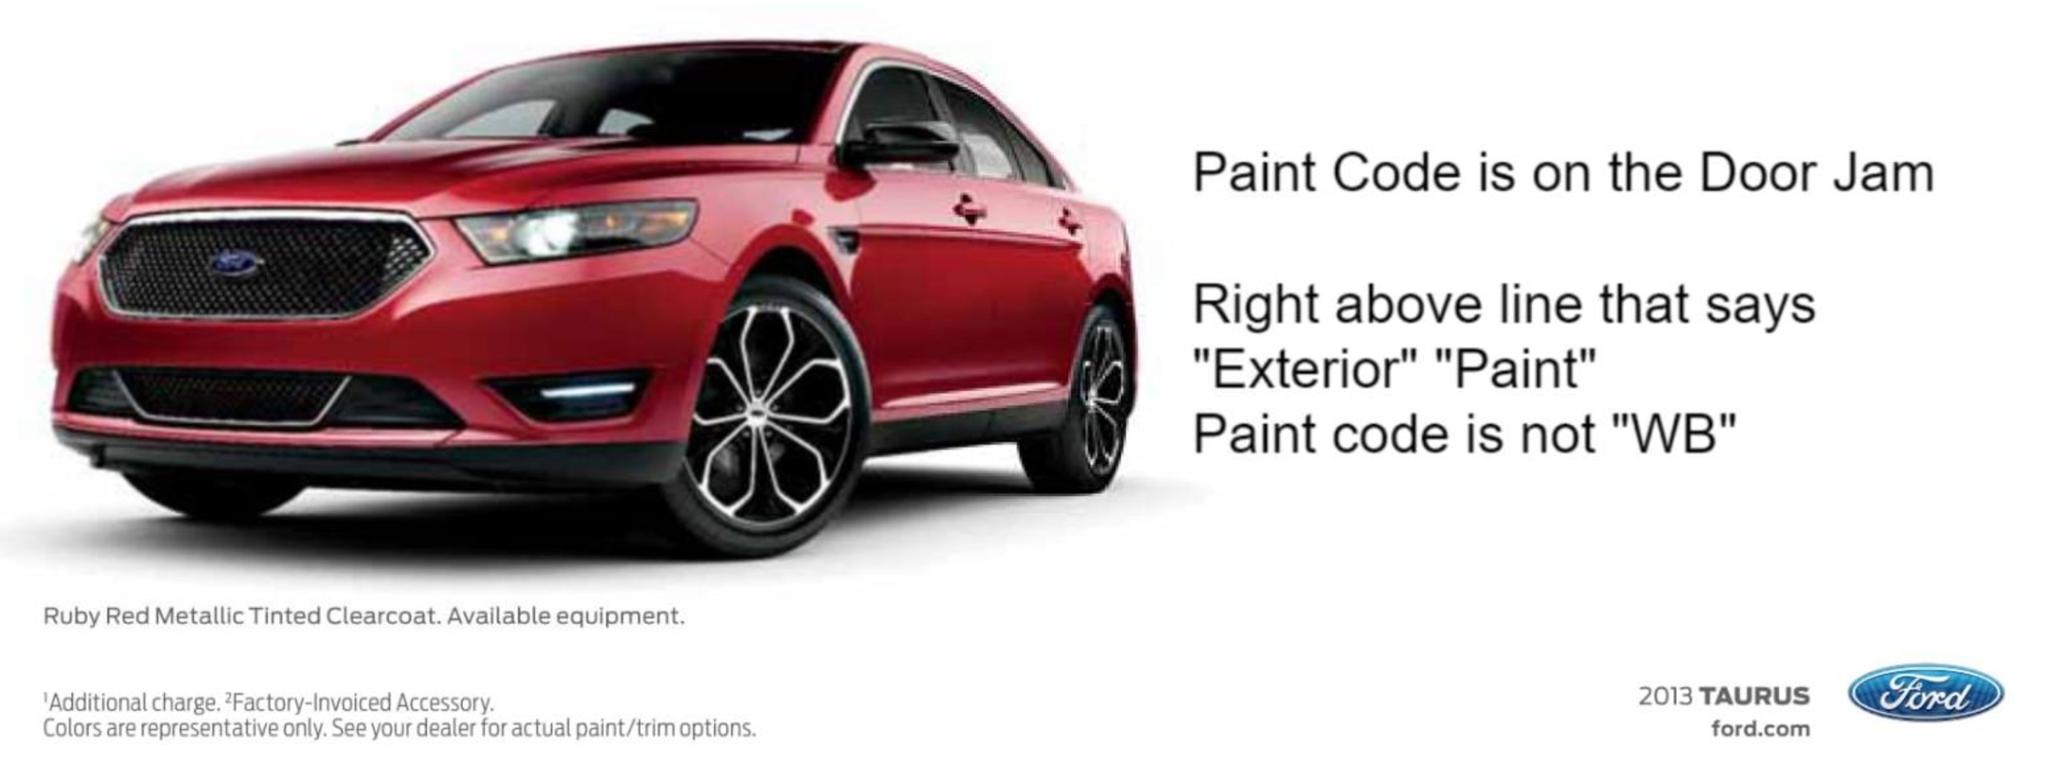 All Ford Taurus Paint Codes are on the Door Jamb